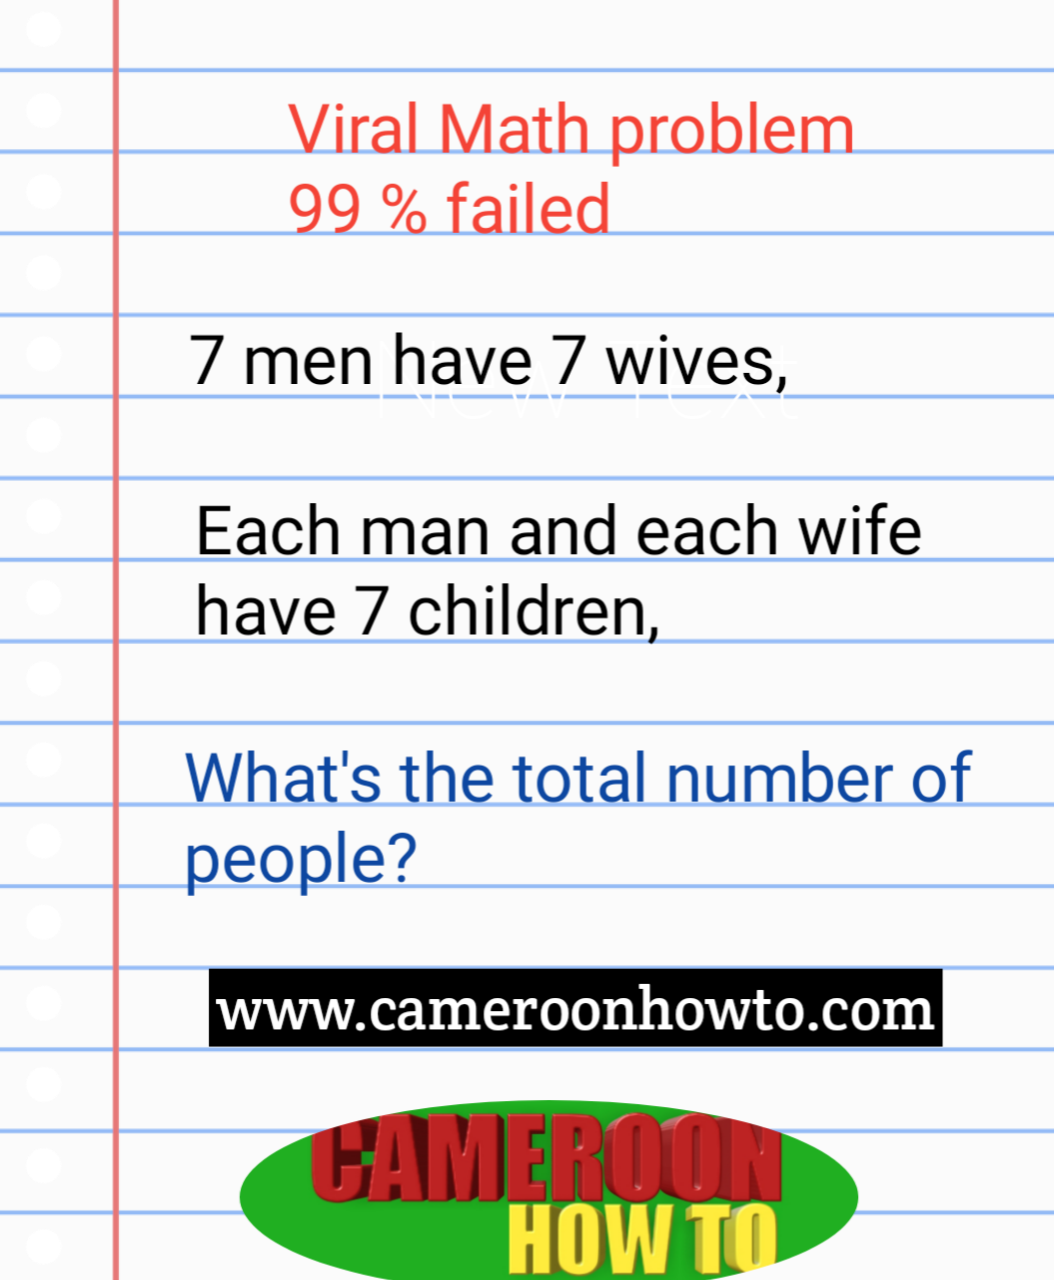 7 men have 7 wives, each man and wife have 7 children, what's the total number of people? answer